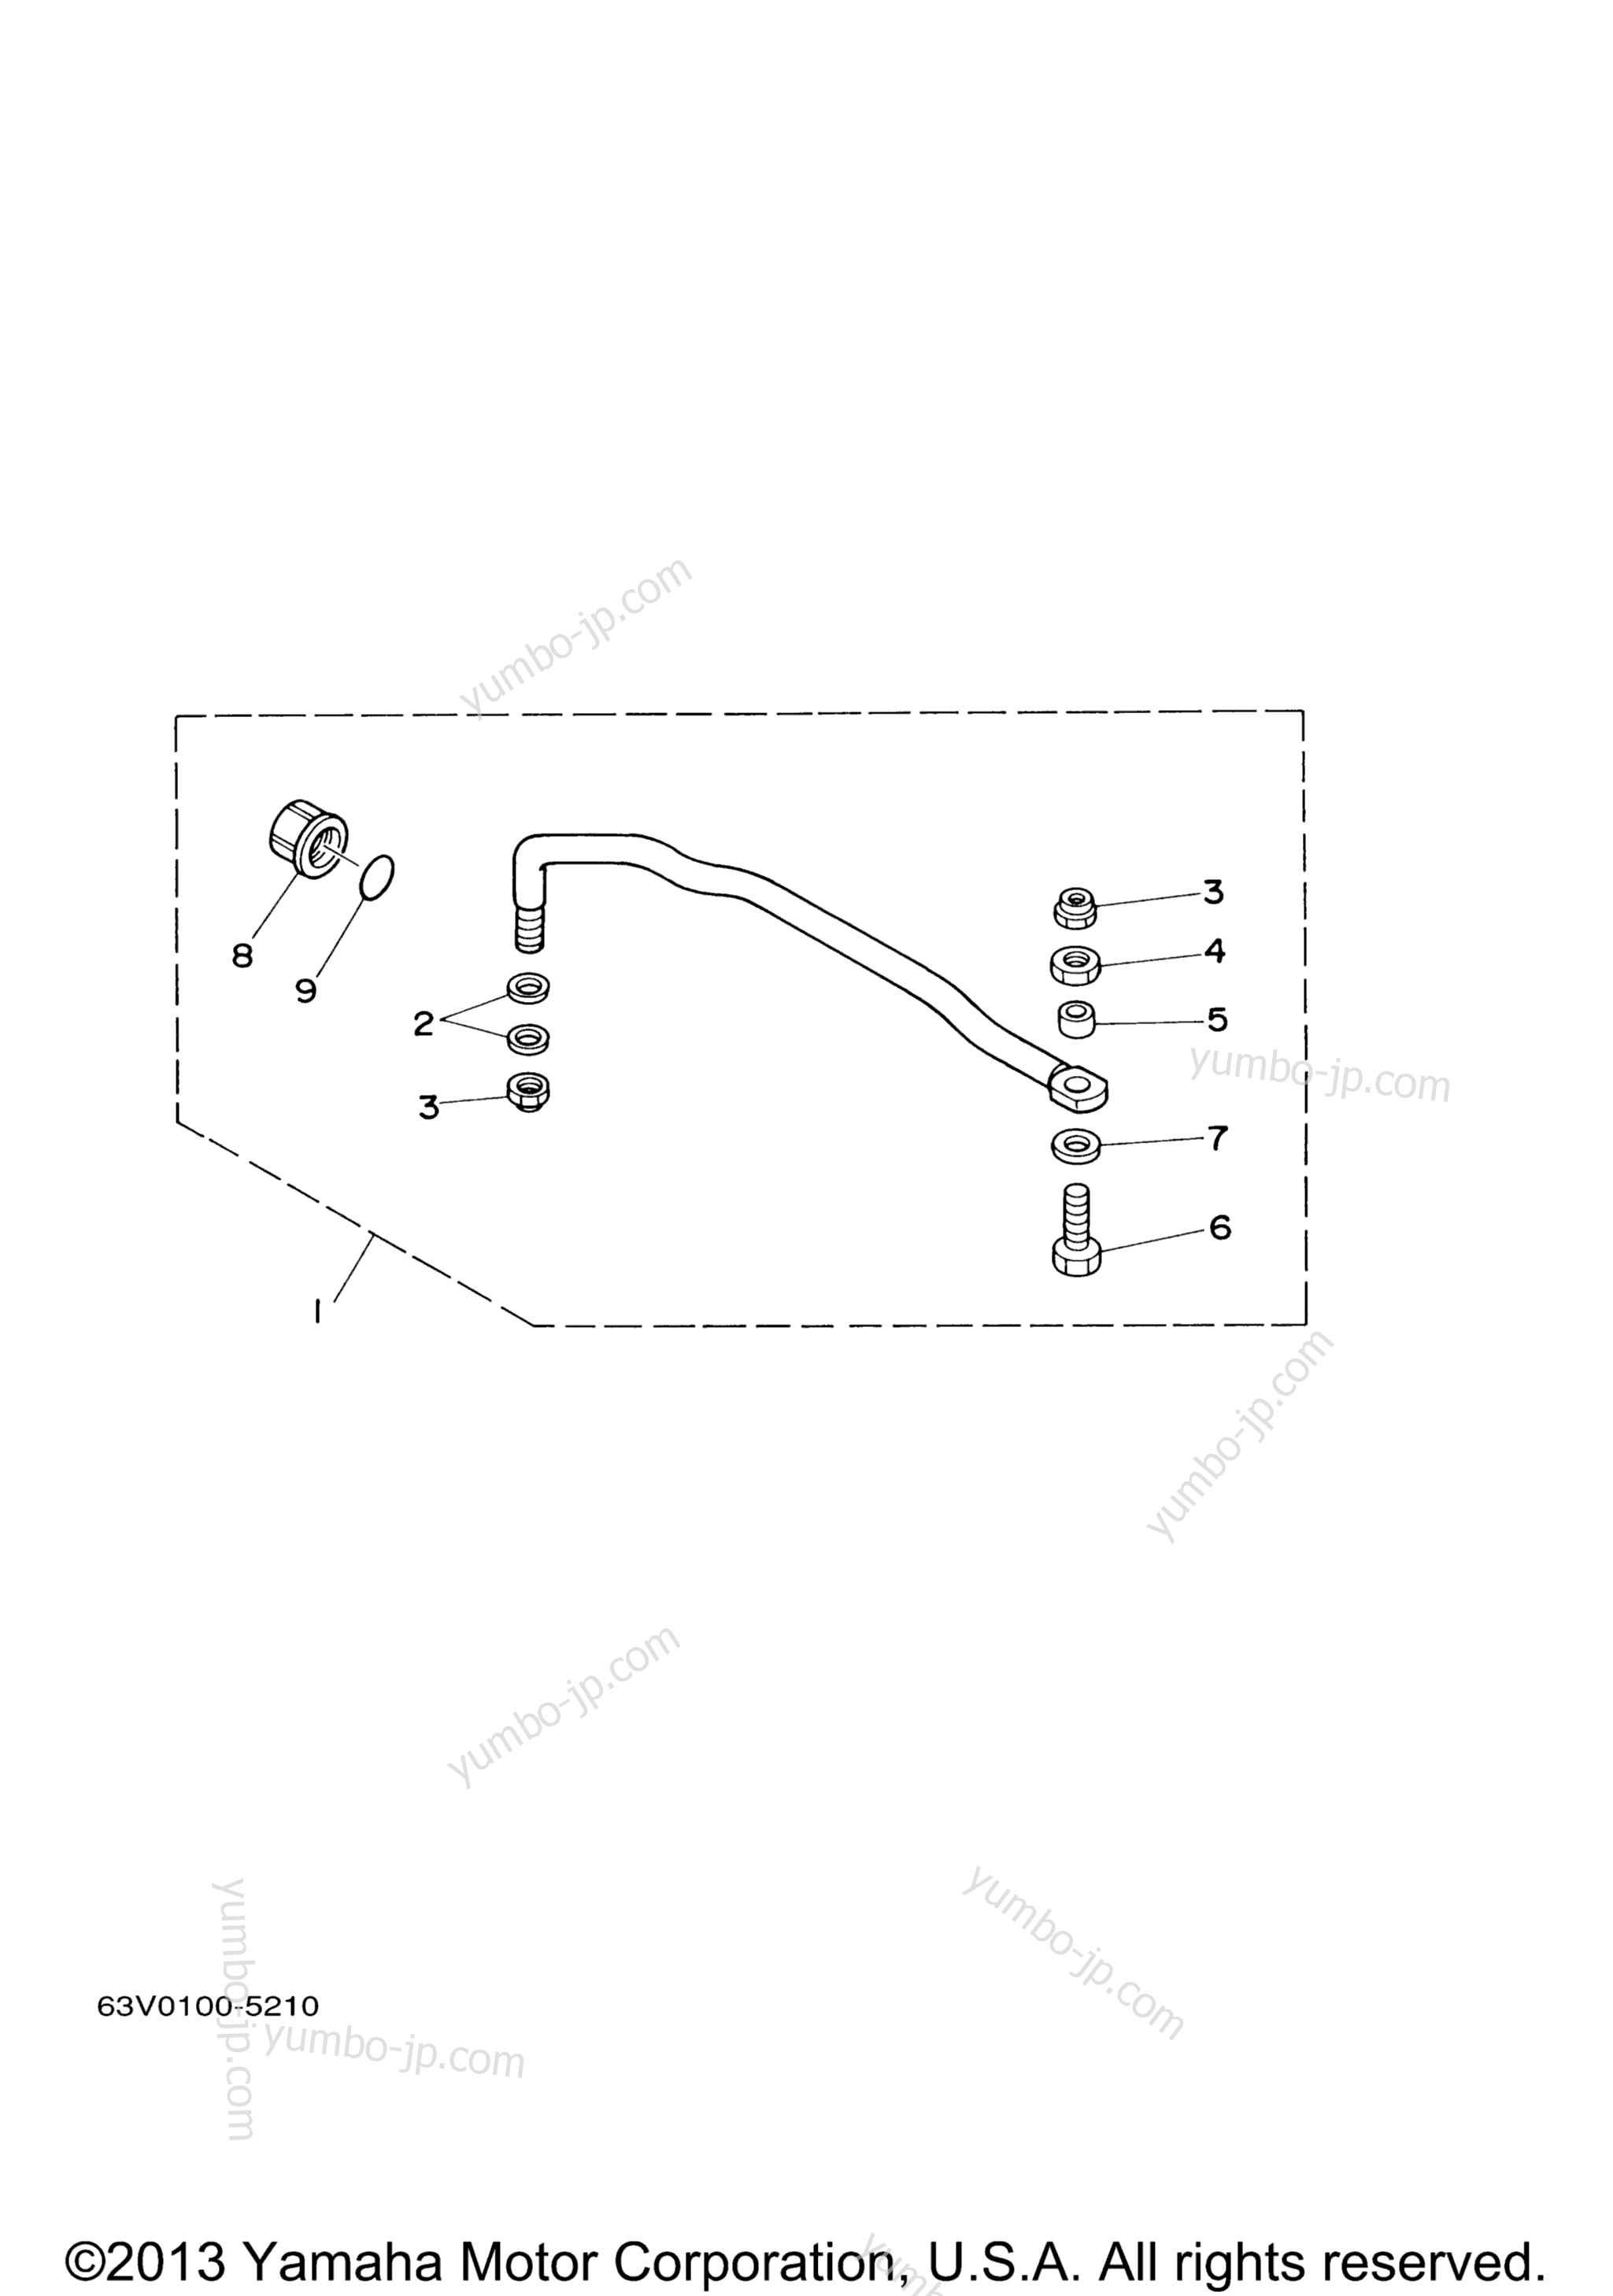 Steering Guide for outboards YAMAHA F9.9MSH2 (0405) 66N-1004576~1005500 F9.9MSH2_MLH2_ELR2 66NK-100000 2006 year